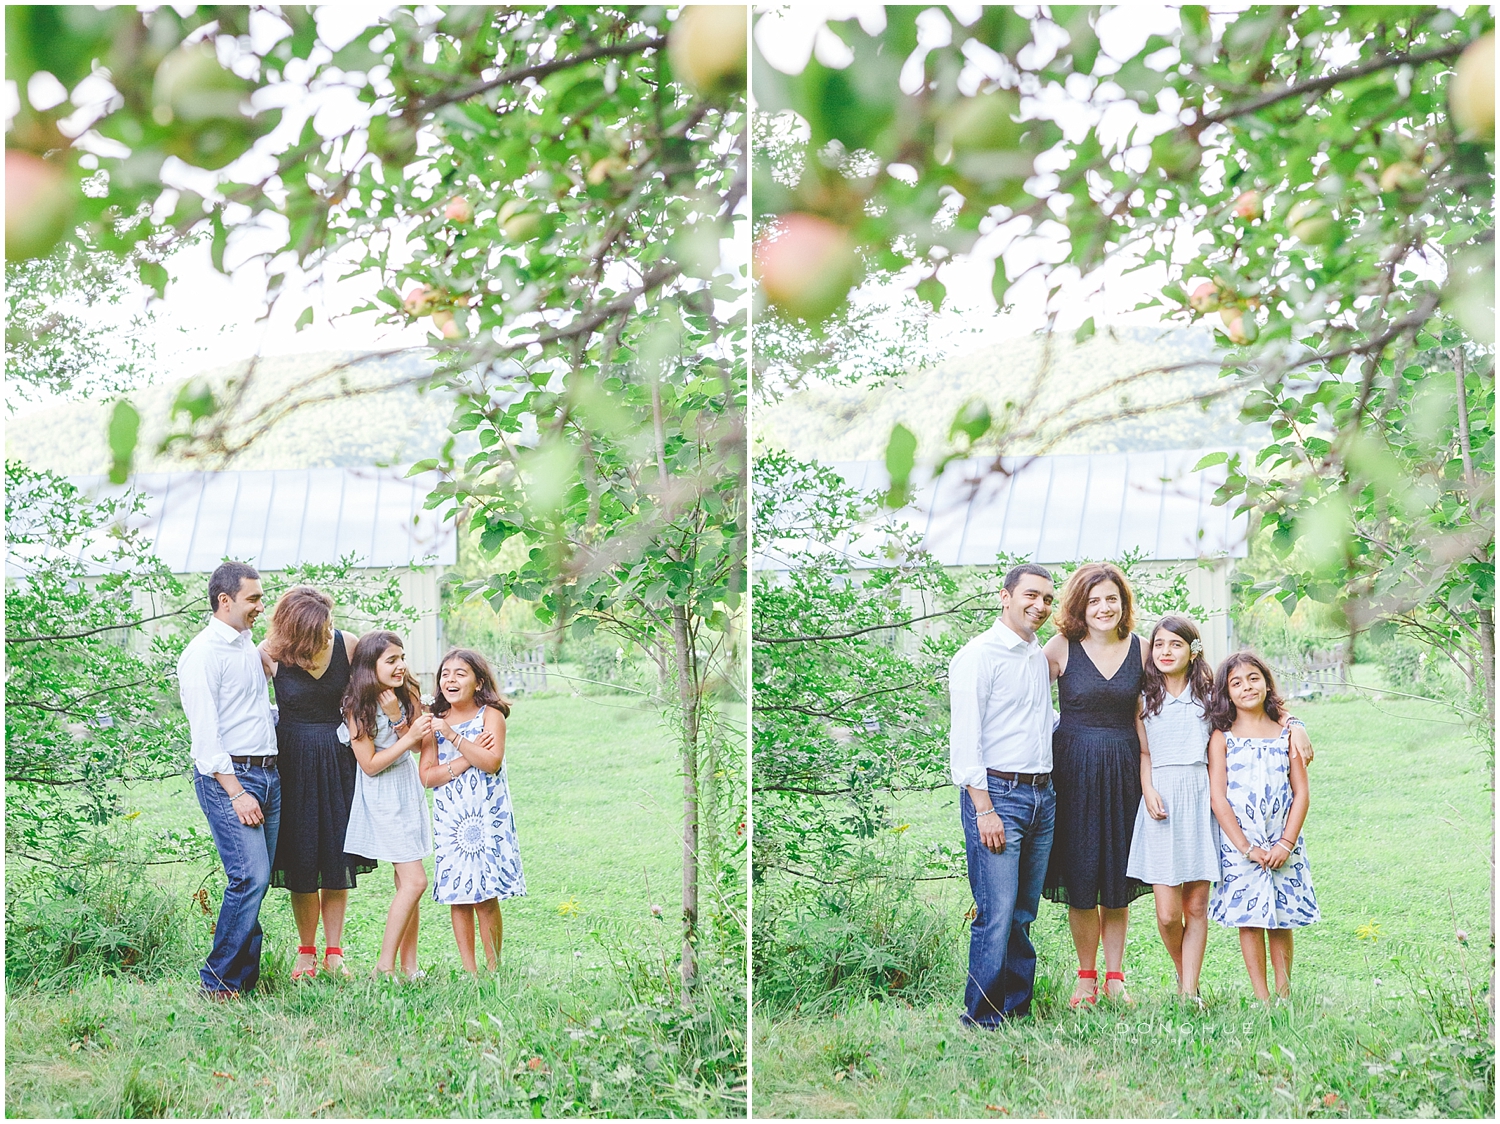 Family Portraits | Strafford, Vermont | Amy Donohue Photography